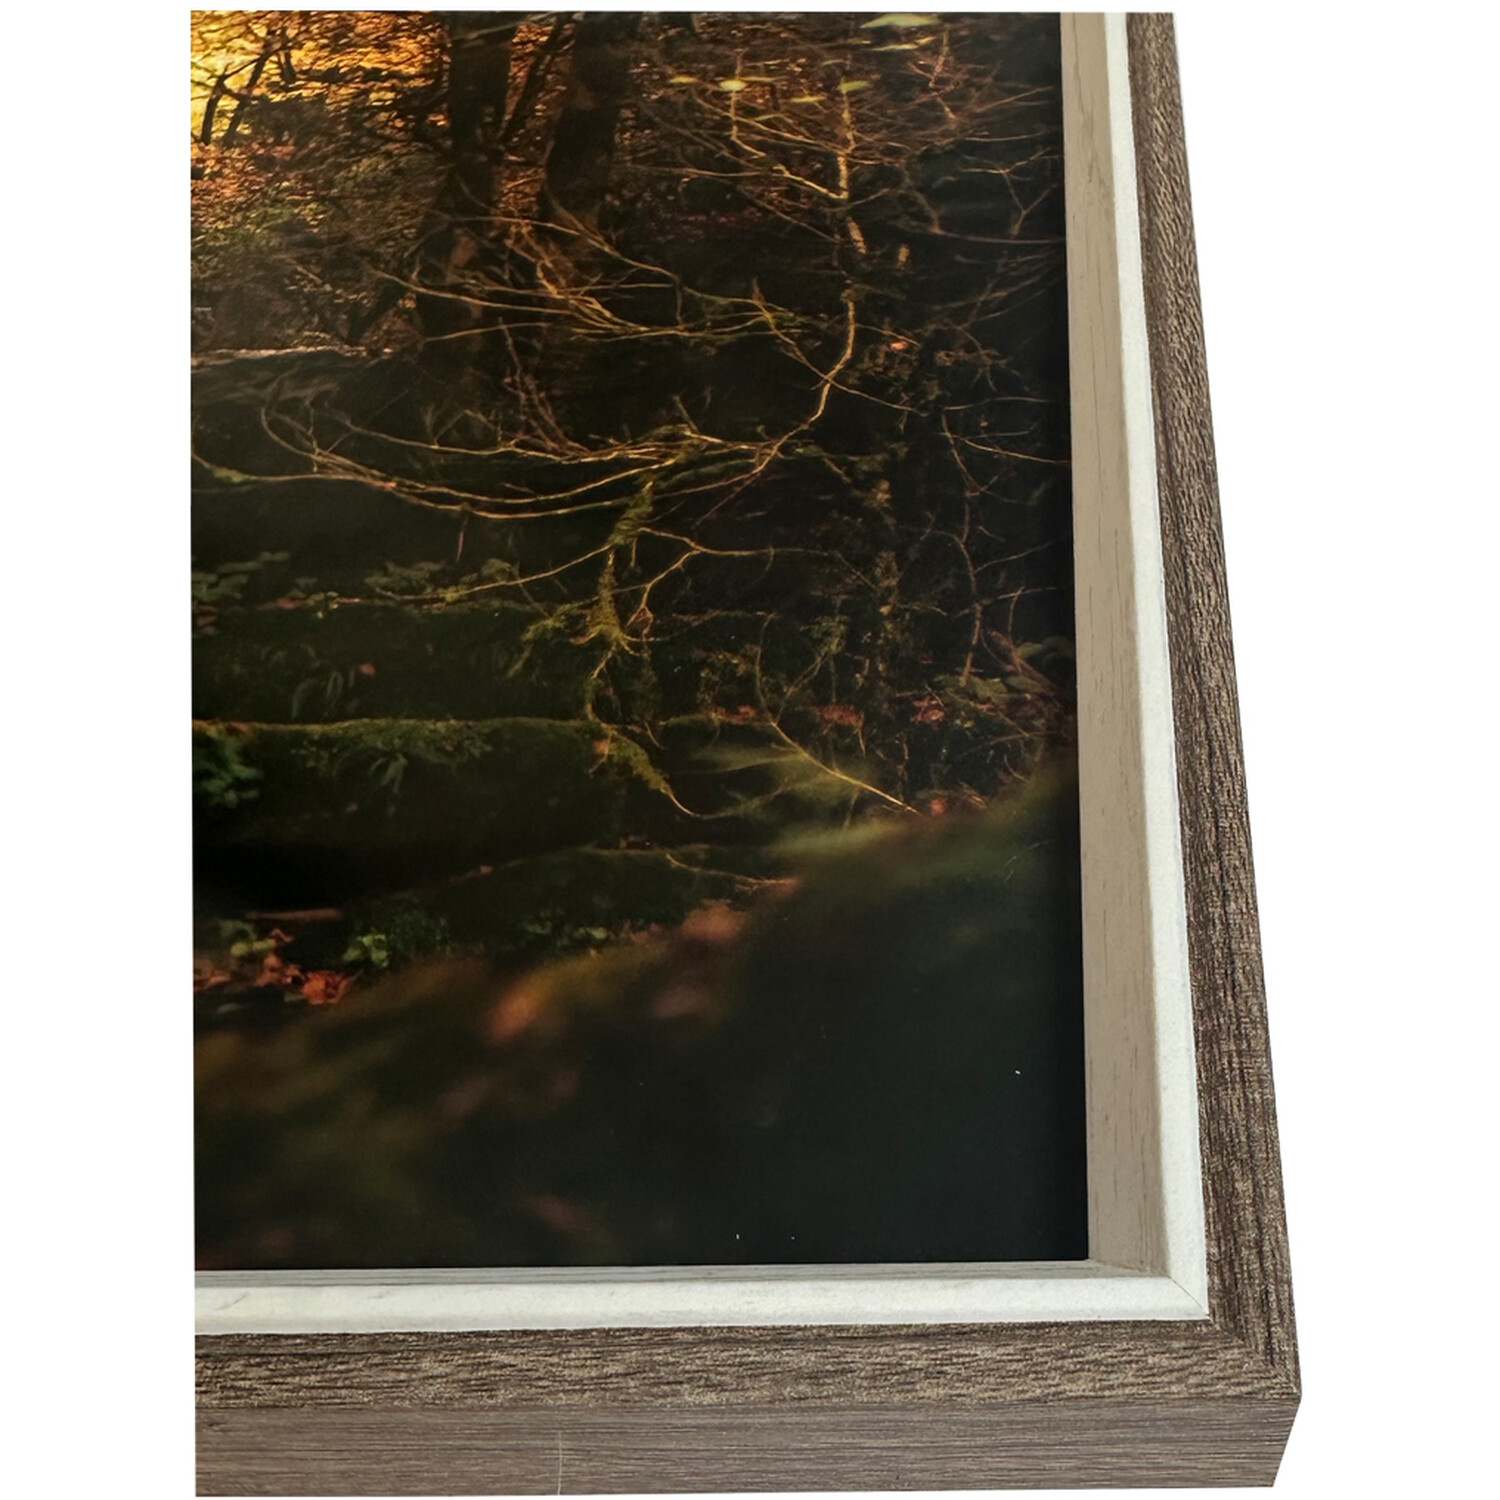 Zoey Rustic Wood Effect Frame - Brown / 8x6in Image 3